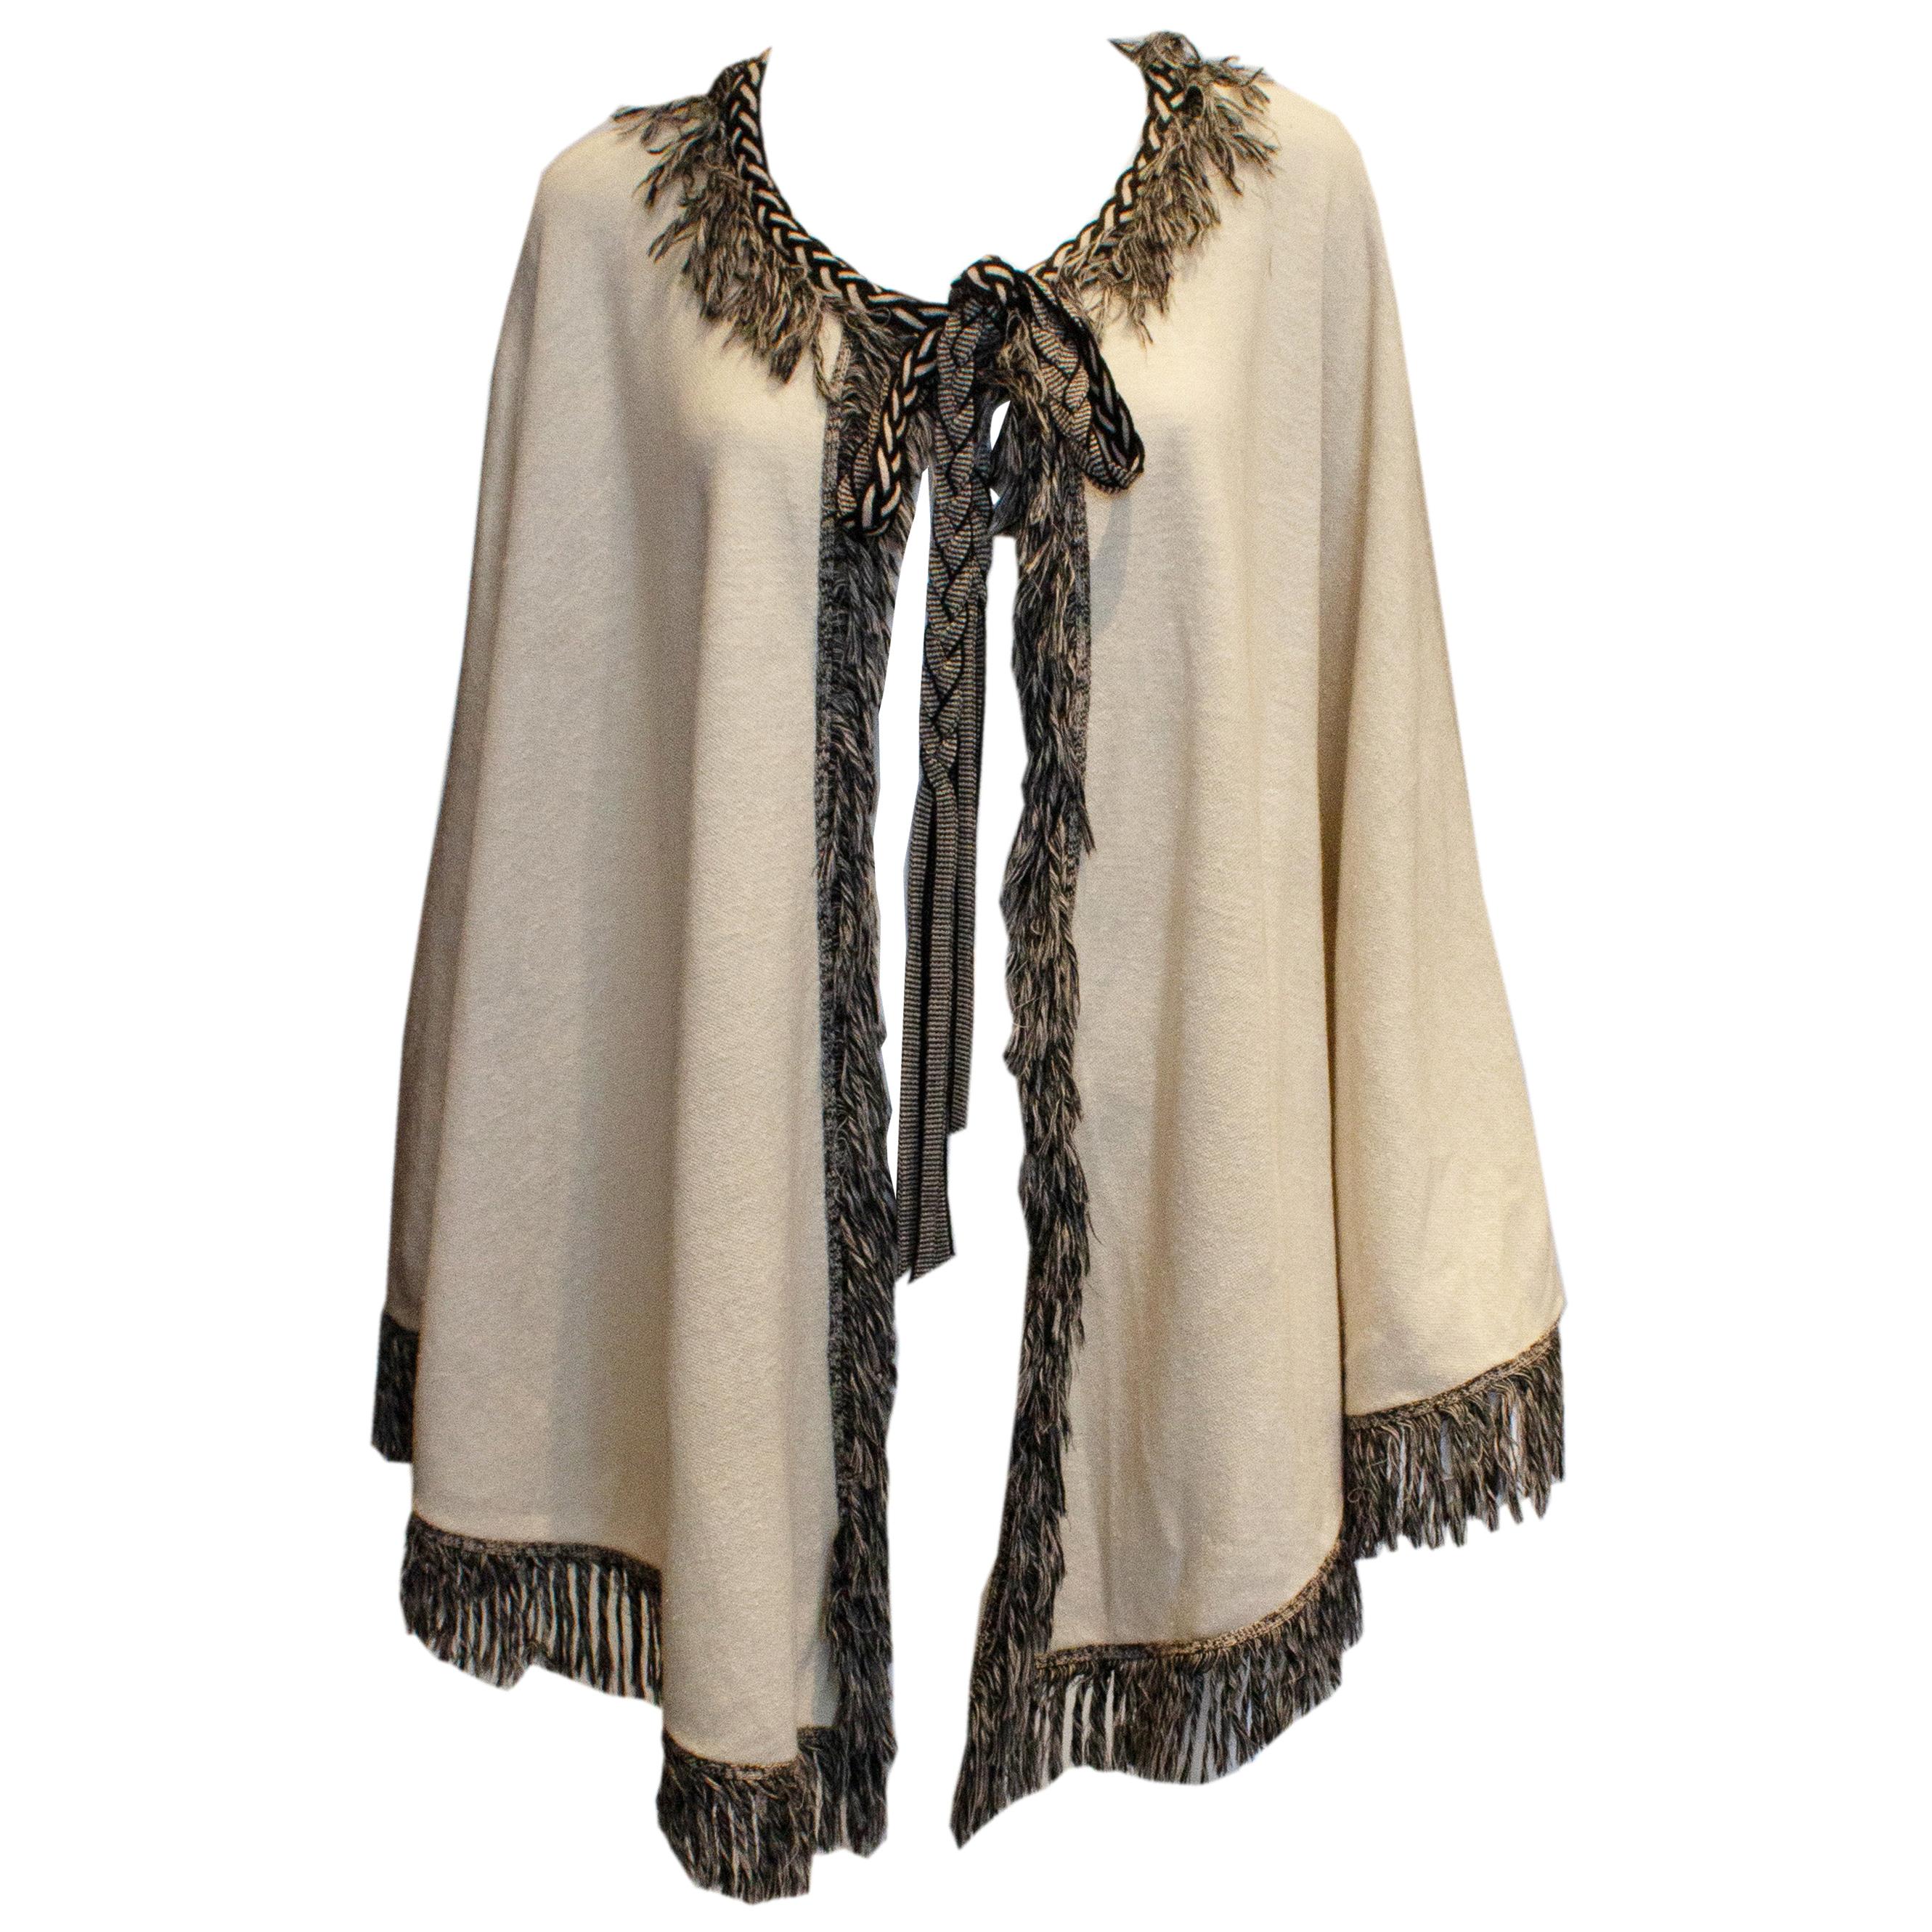 Vintage Ivory and Black Cape by Fierony Paris